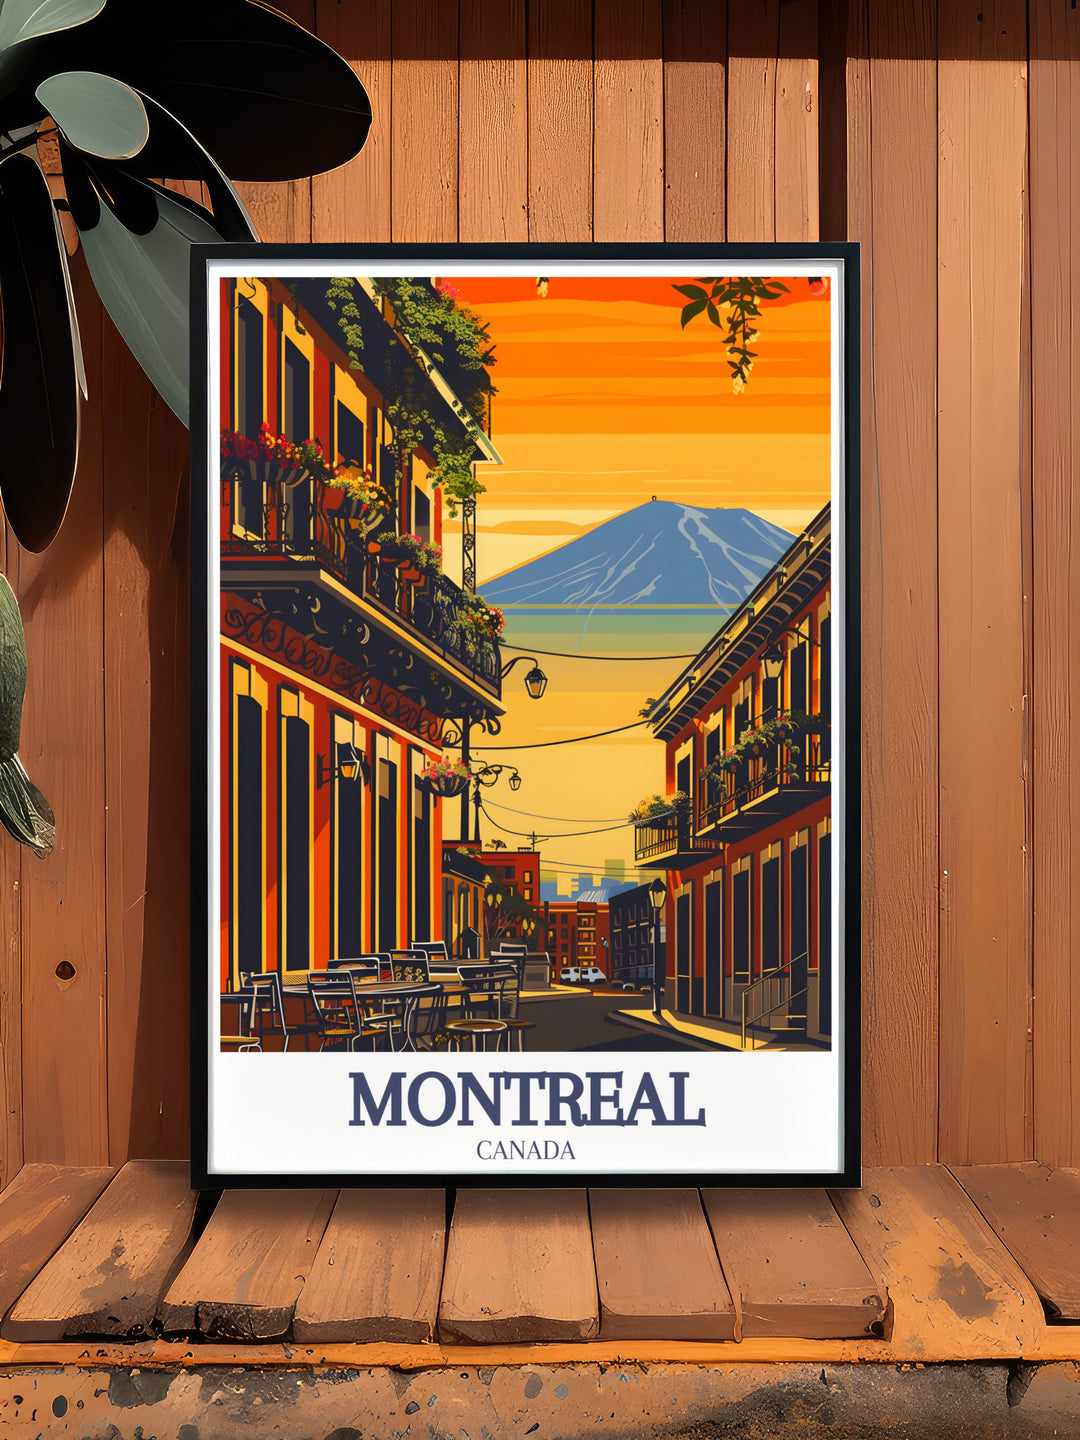 Stunning Rue Crescent Mount Royal artwork capturing the charm of Montreals cityscape high quality wall art ideal for enhancing your home decor perfect for anyone who loves the essence of Montreals vibrant and peaceful spots.